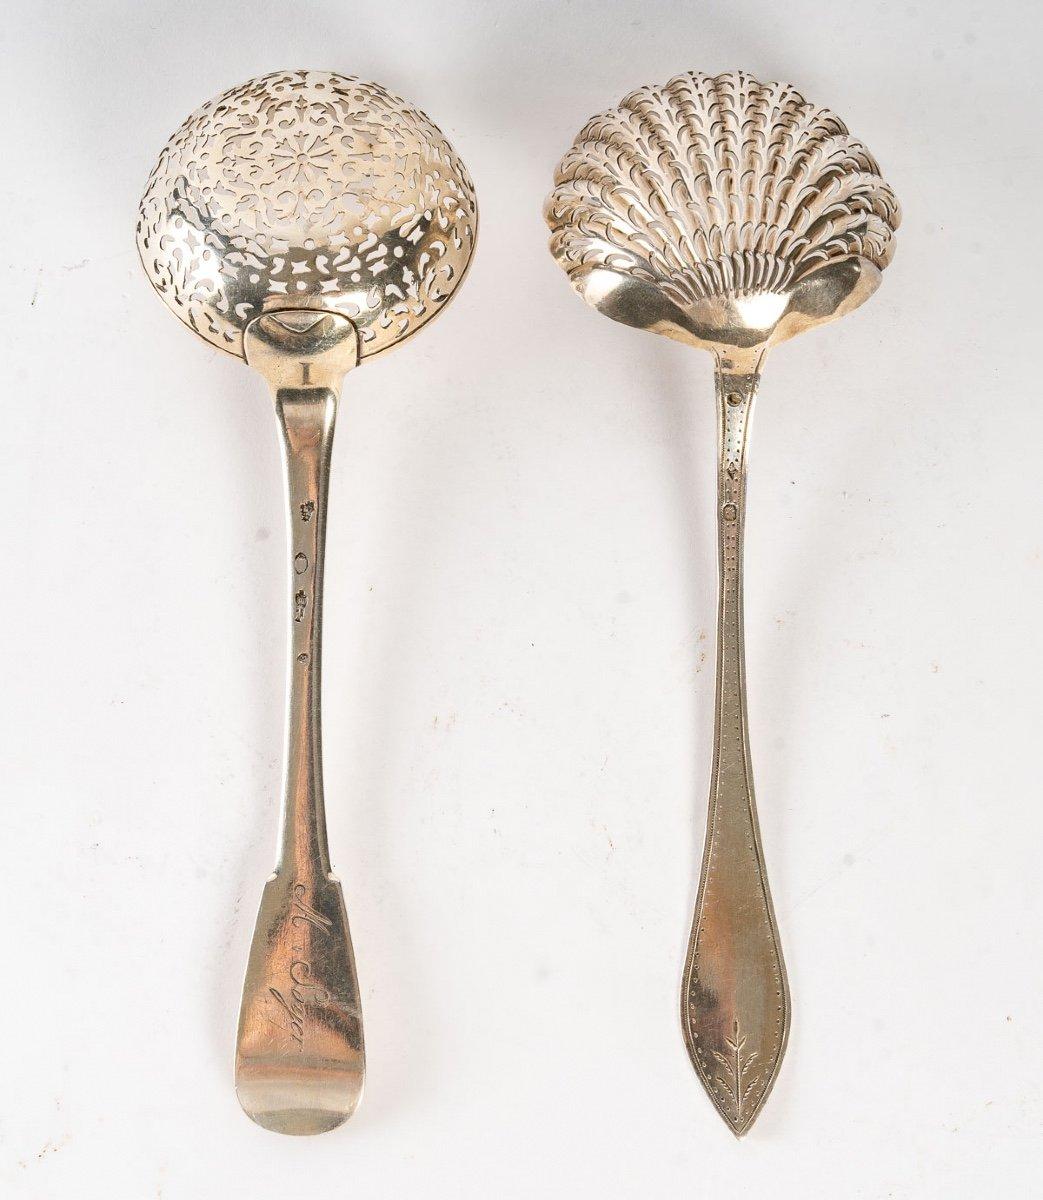 Restauration Magnificent Lot of Two Sprinkling Spoons, 19th Century, Sterling Silver For Sale